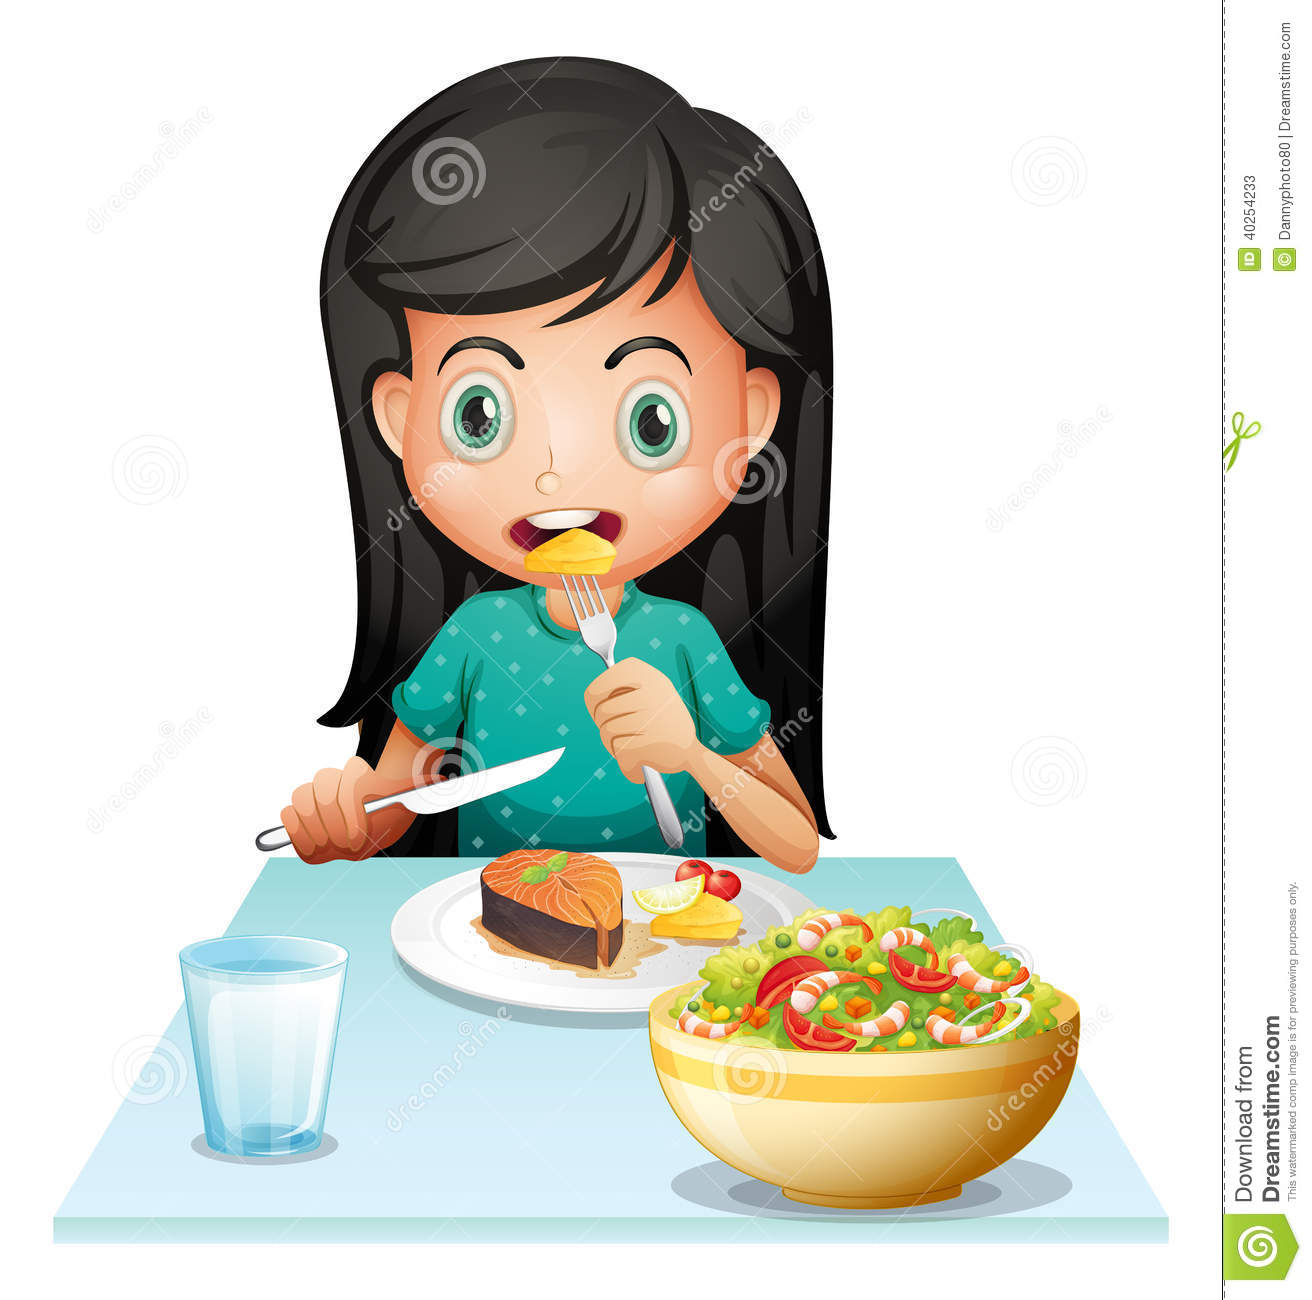 Illustration Of A Girl Eating Her Lunch On A White Background